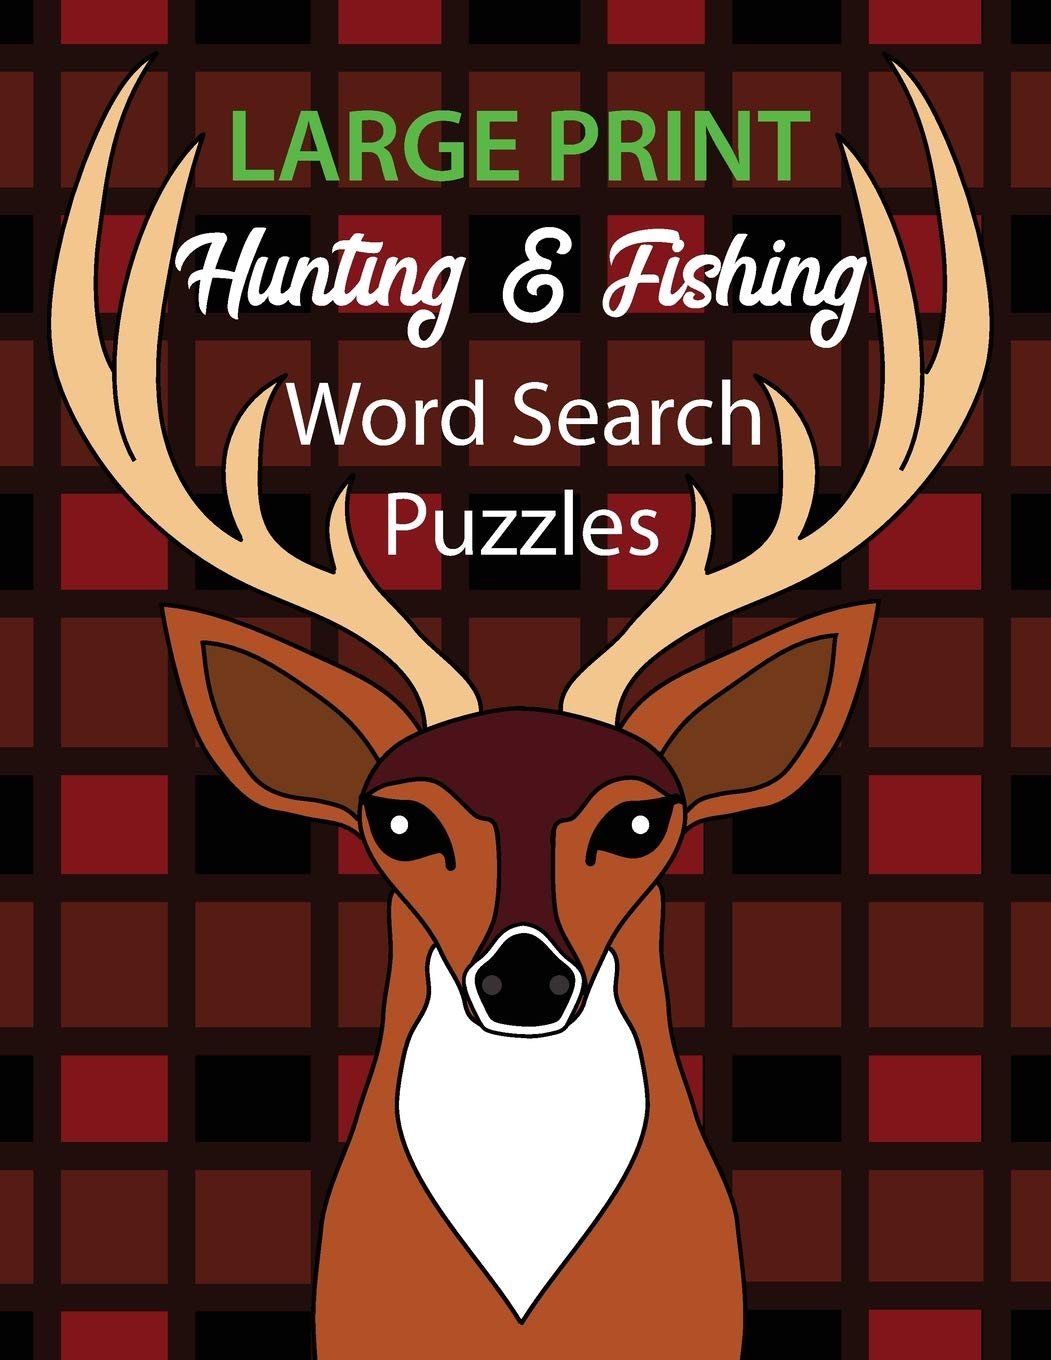 Large Print Hunting & Fishing Word Search Puzzles: Puzzles for Adults & Seniors